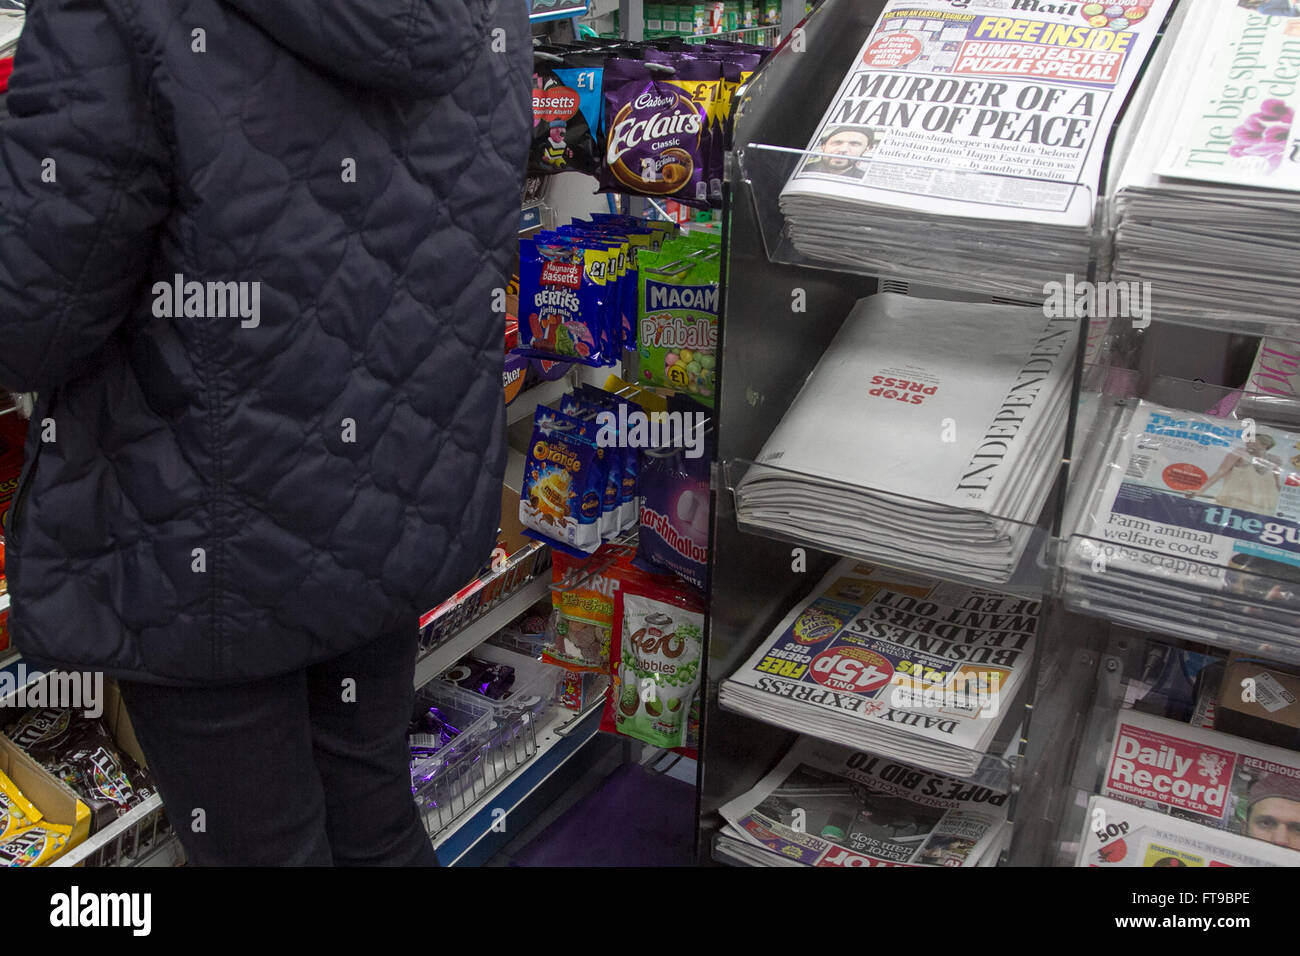 London, UK. 26th March 2016. The final print edition of the British newspaper 'The Independent' which has been in circulation since 1986. The paper will now be available in a 'digital platform only' © amer ghazzal/Alamy Live News Credit:  amer ghazzal/Alamy Live News Stock Photo